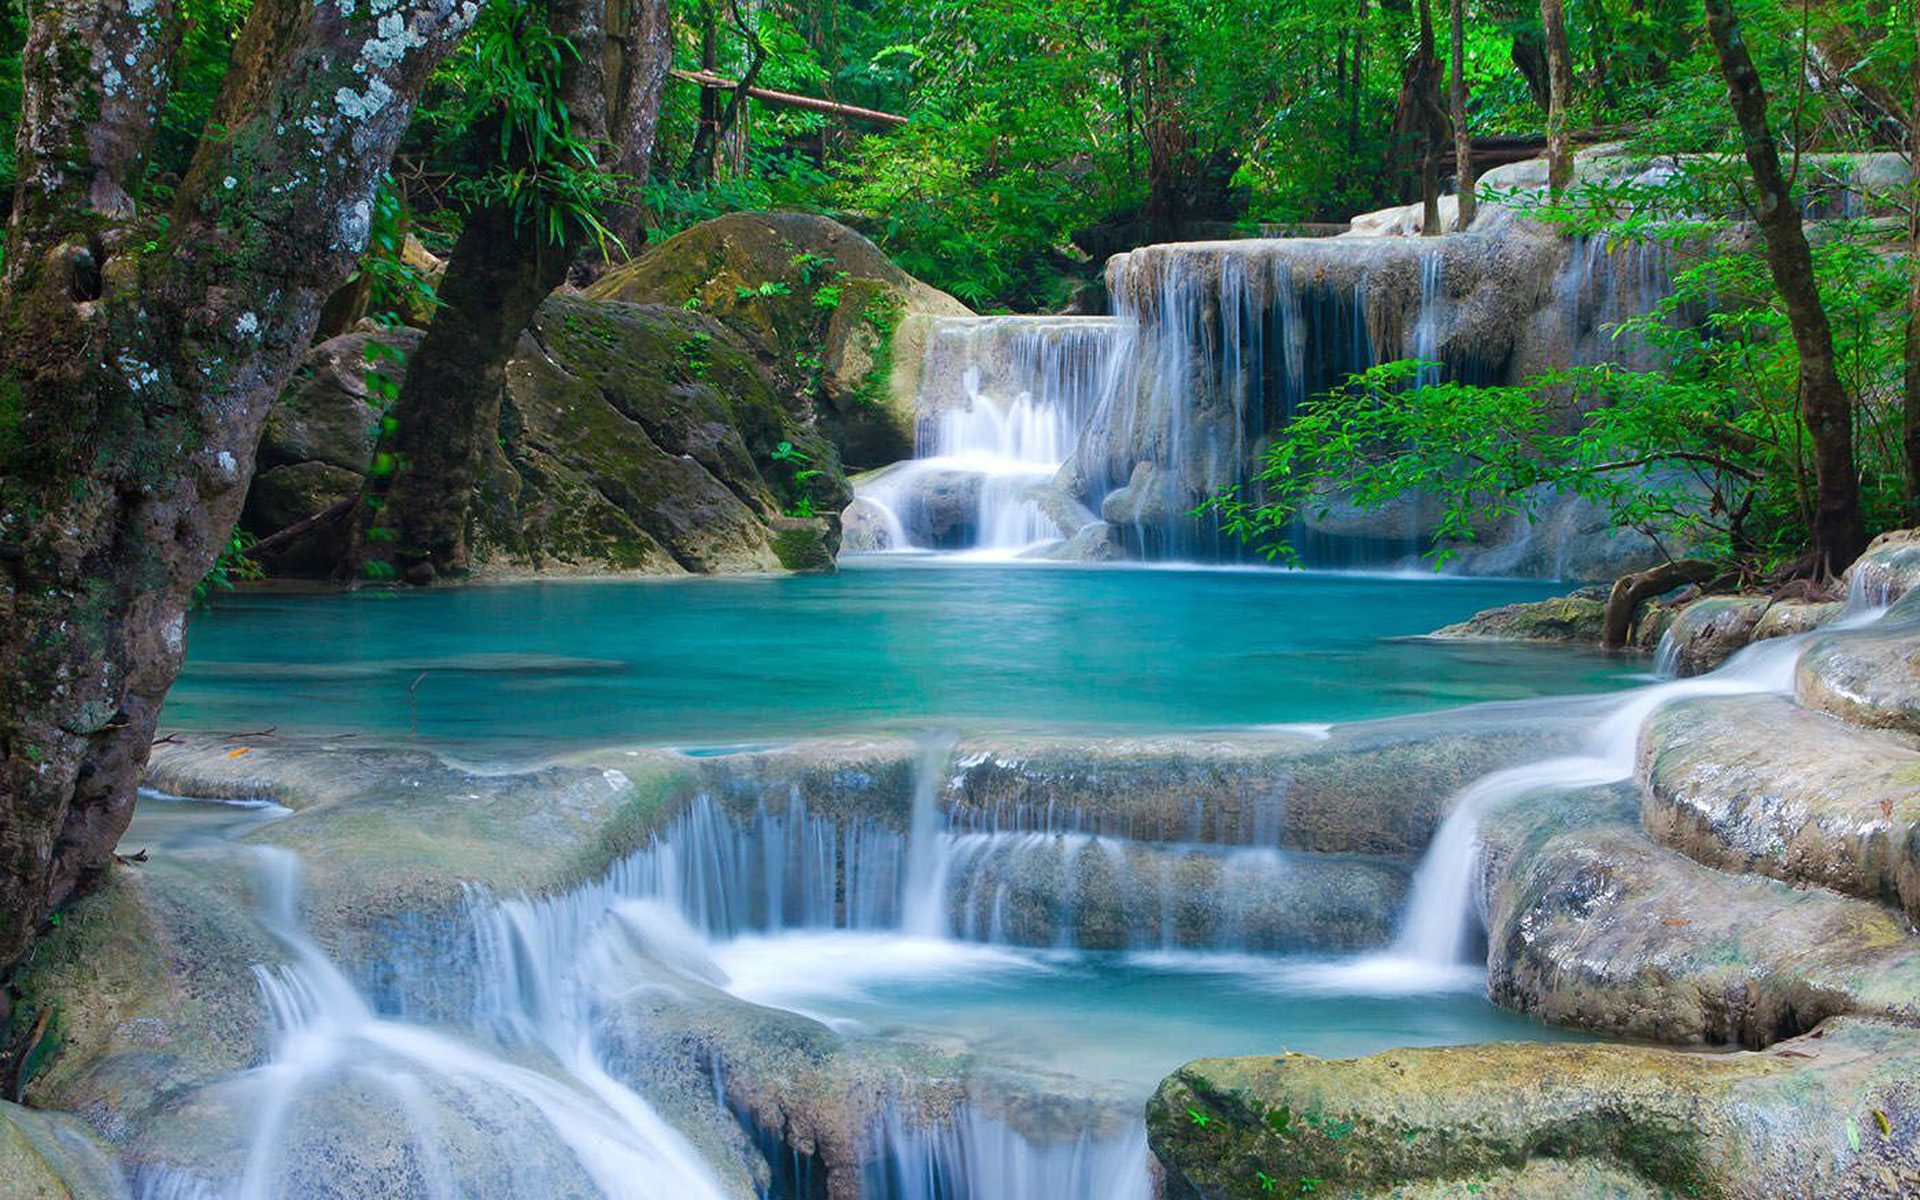 Thailand Waterfalls The Beauty Of Nature Landscape HD Wallpaper Tablets And Mobile Phones Free Download For Desktop, Wallpaper13.com